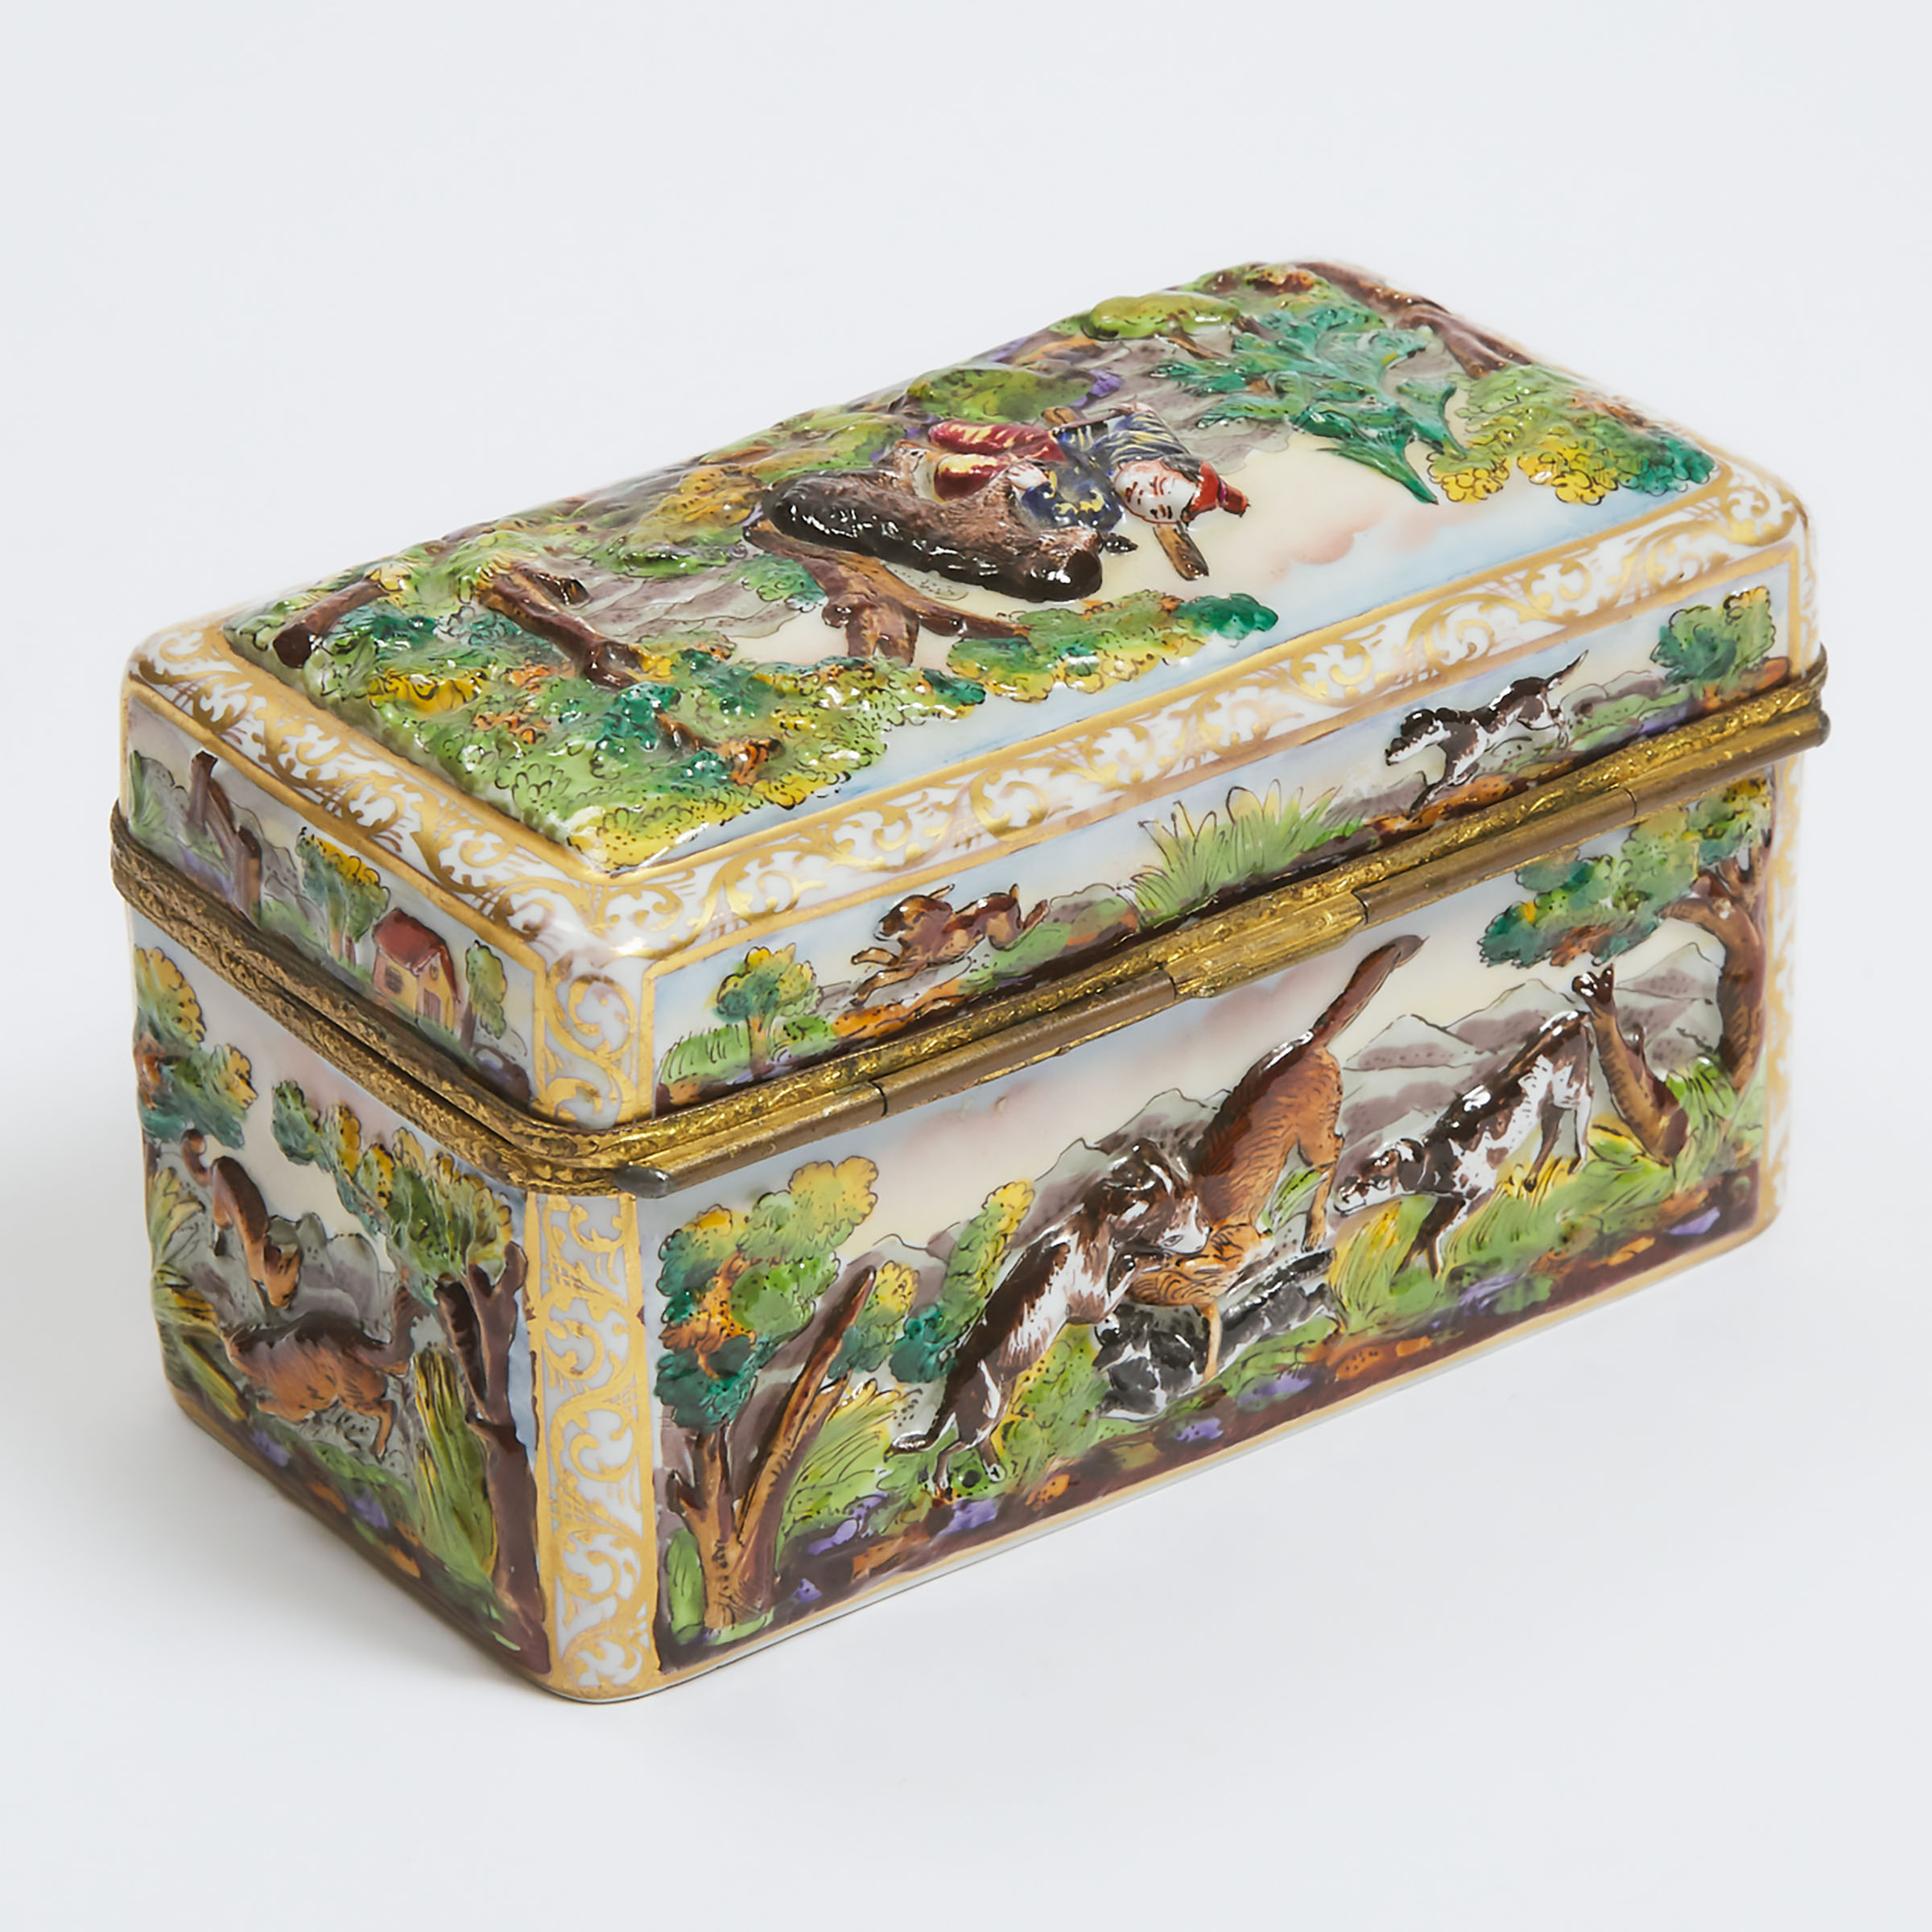 'Naples' Rectangular Small Casket, late 19th/early 20th century